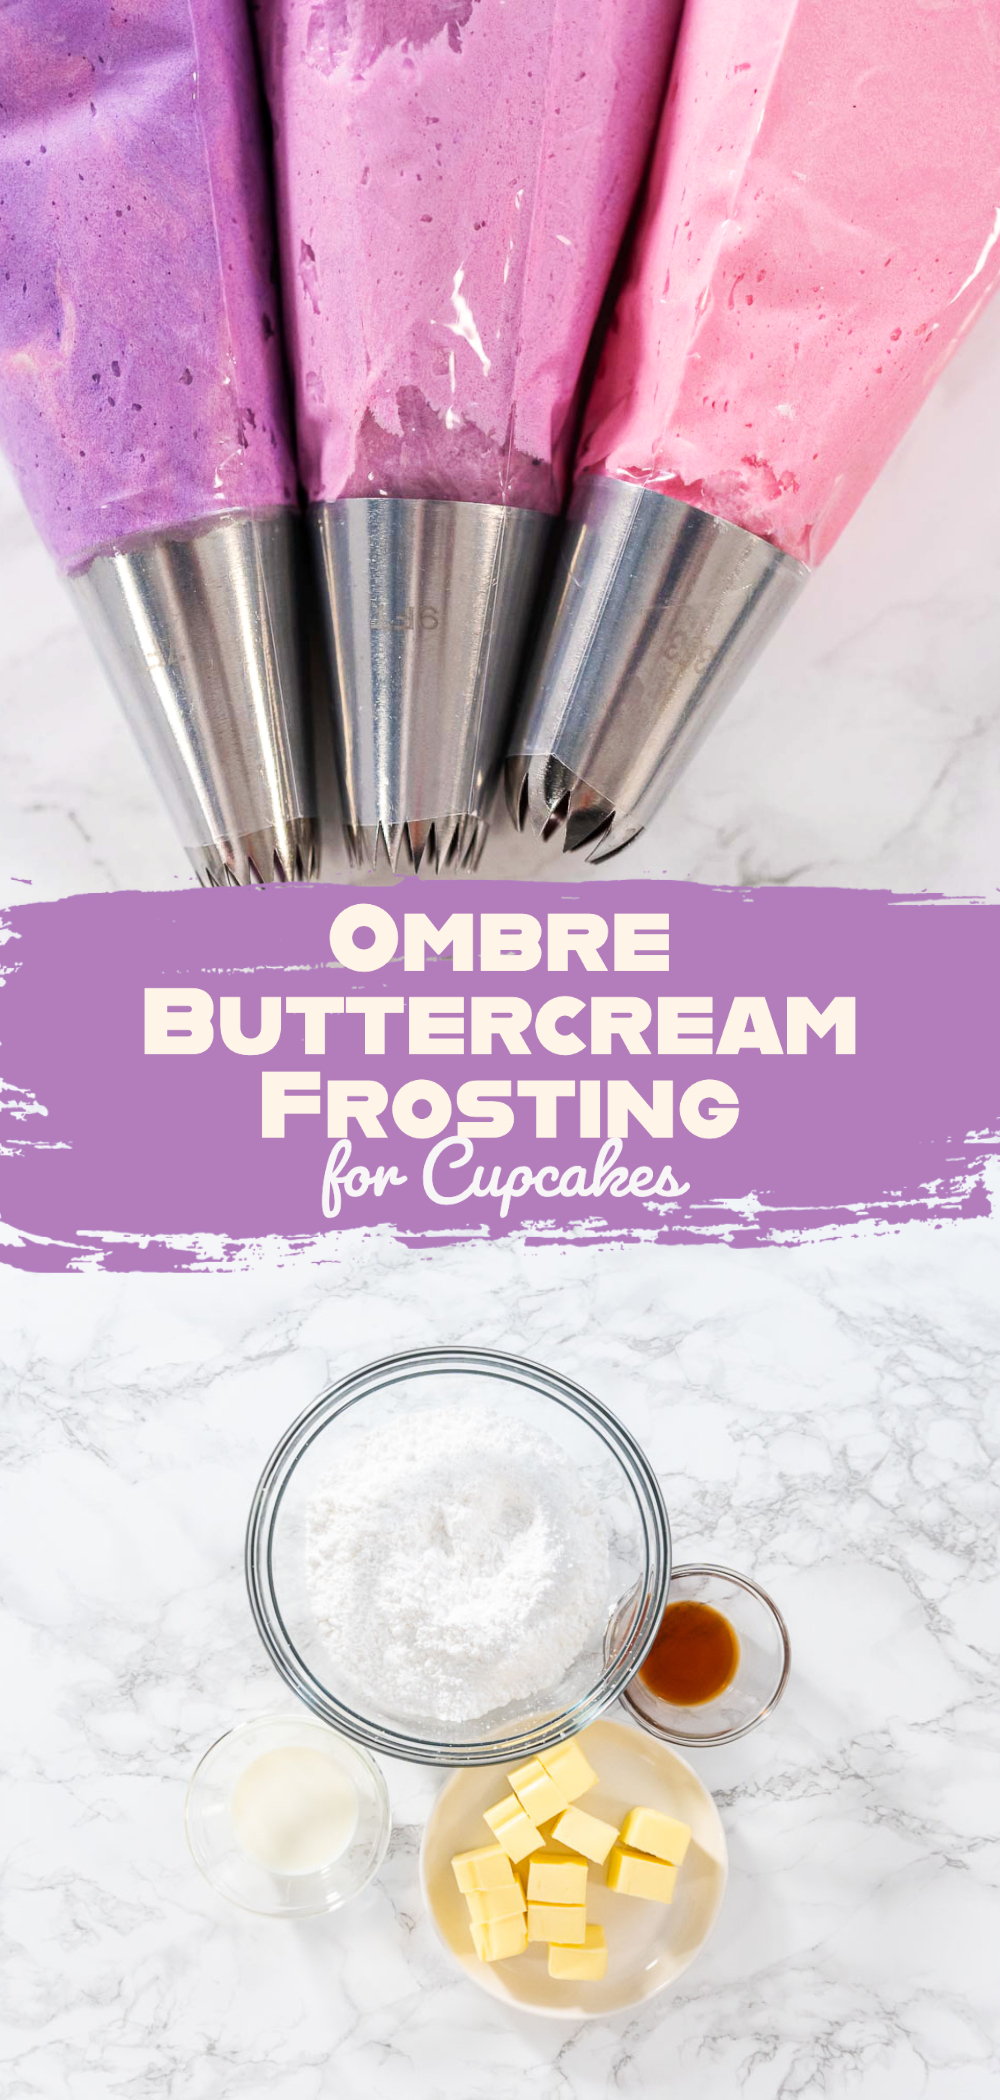 Ombre Buttercream Frosting for Cupcakes